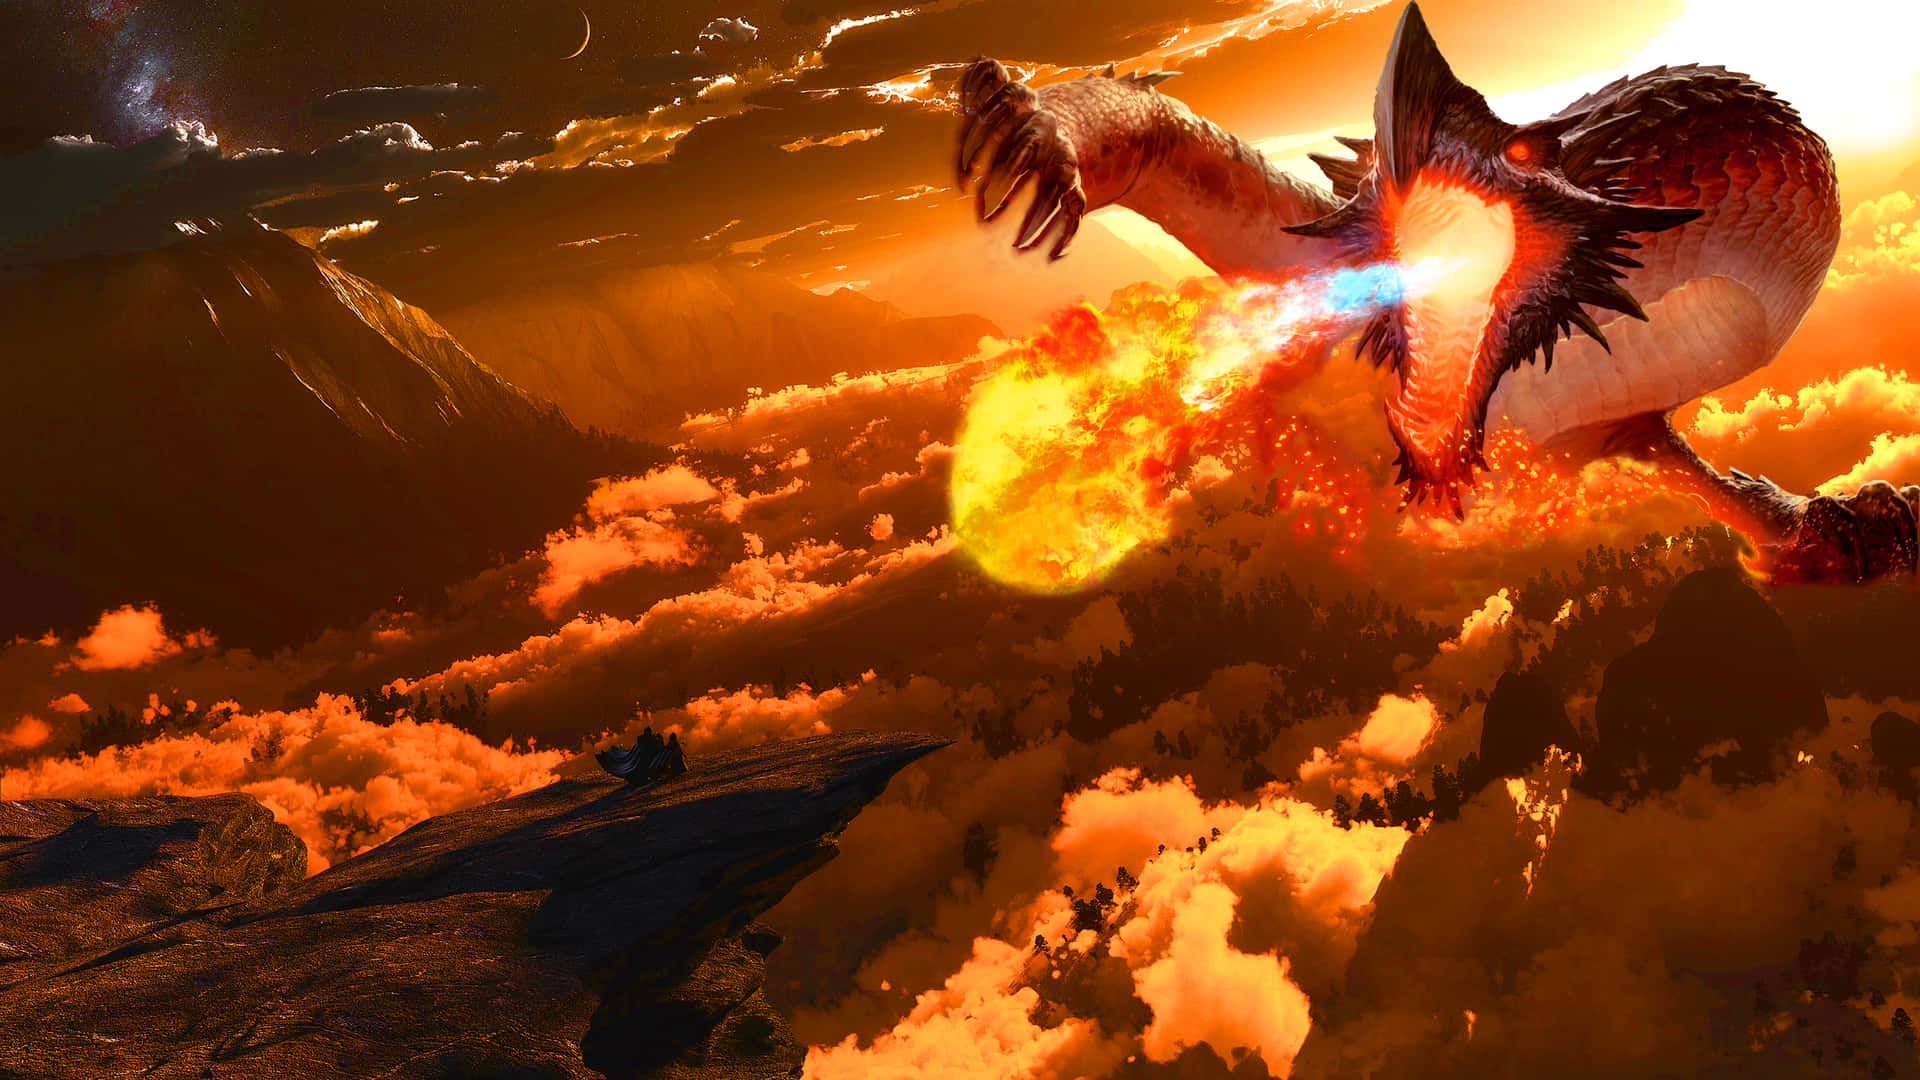 A Dragon Flying In The Sky With Fire